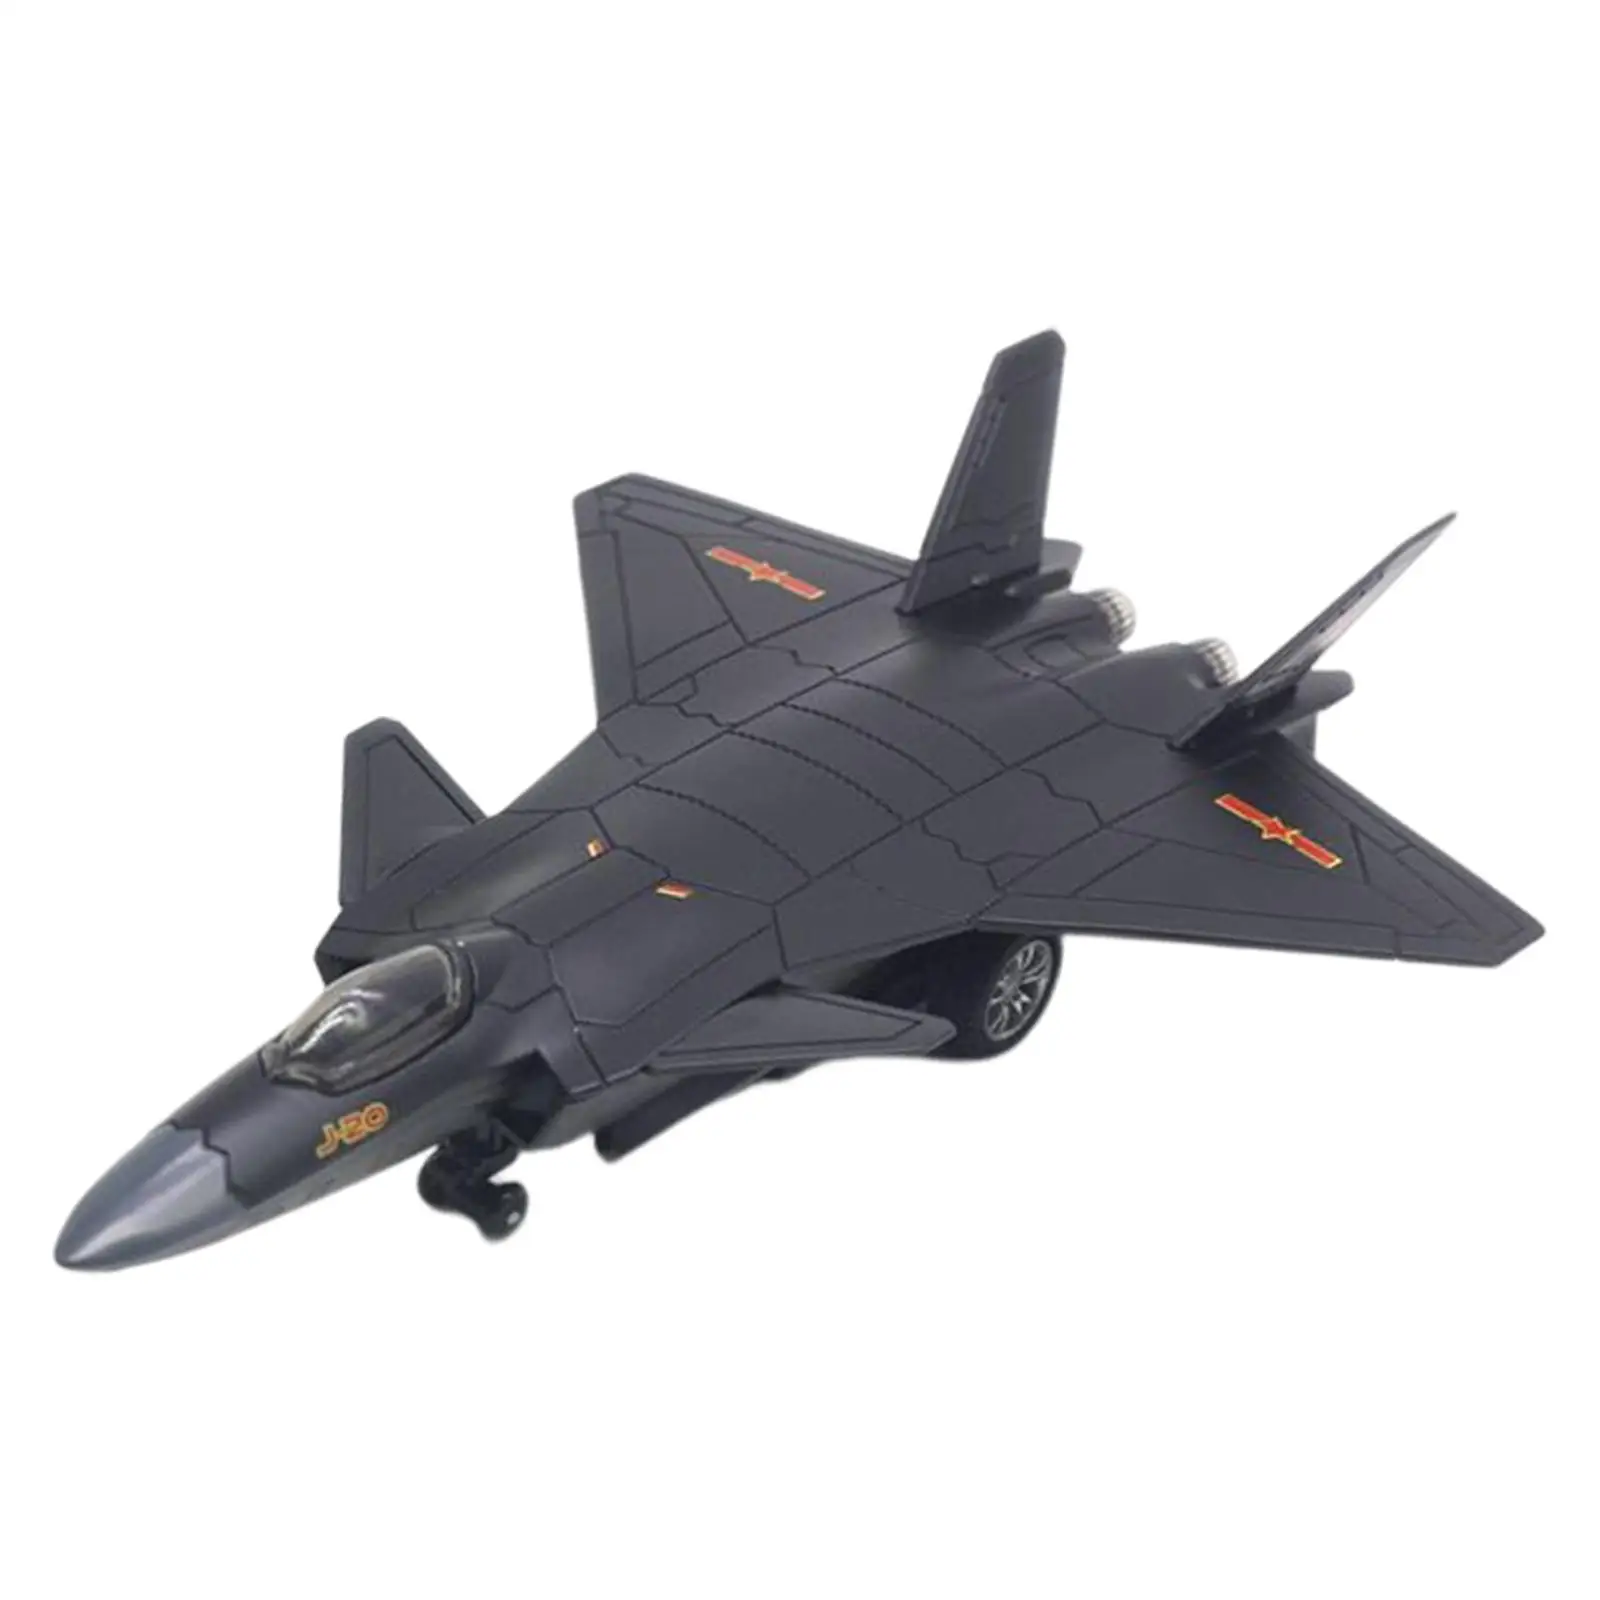 1/144 Airplane Fighter Model Aircraft for Bedroom Living Room Decoration